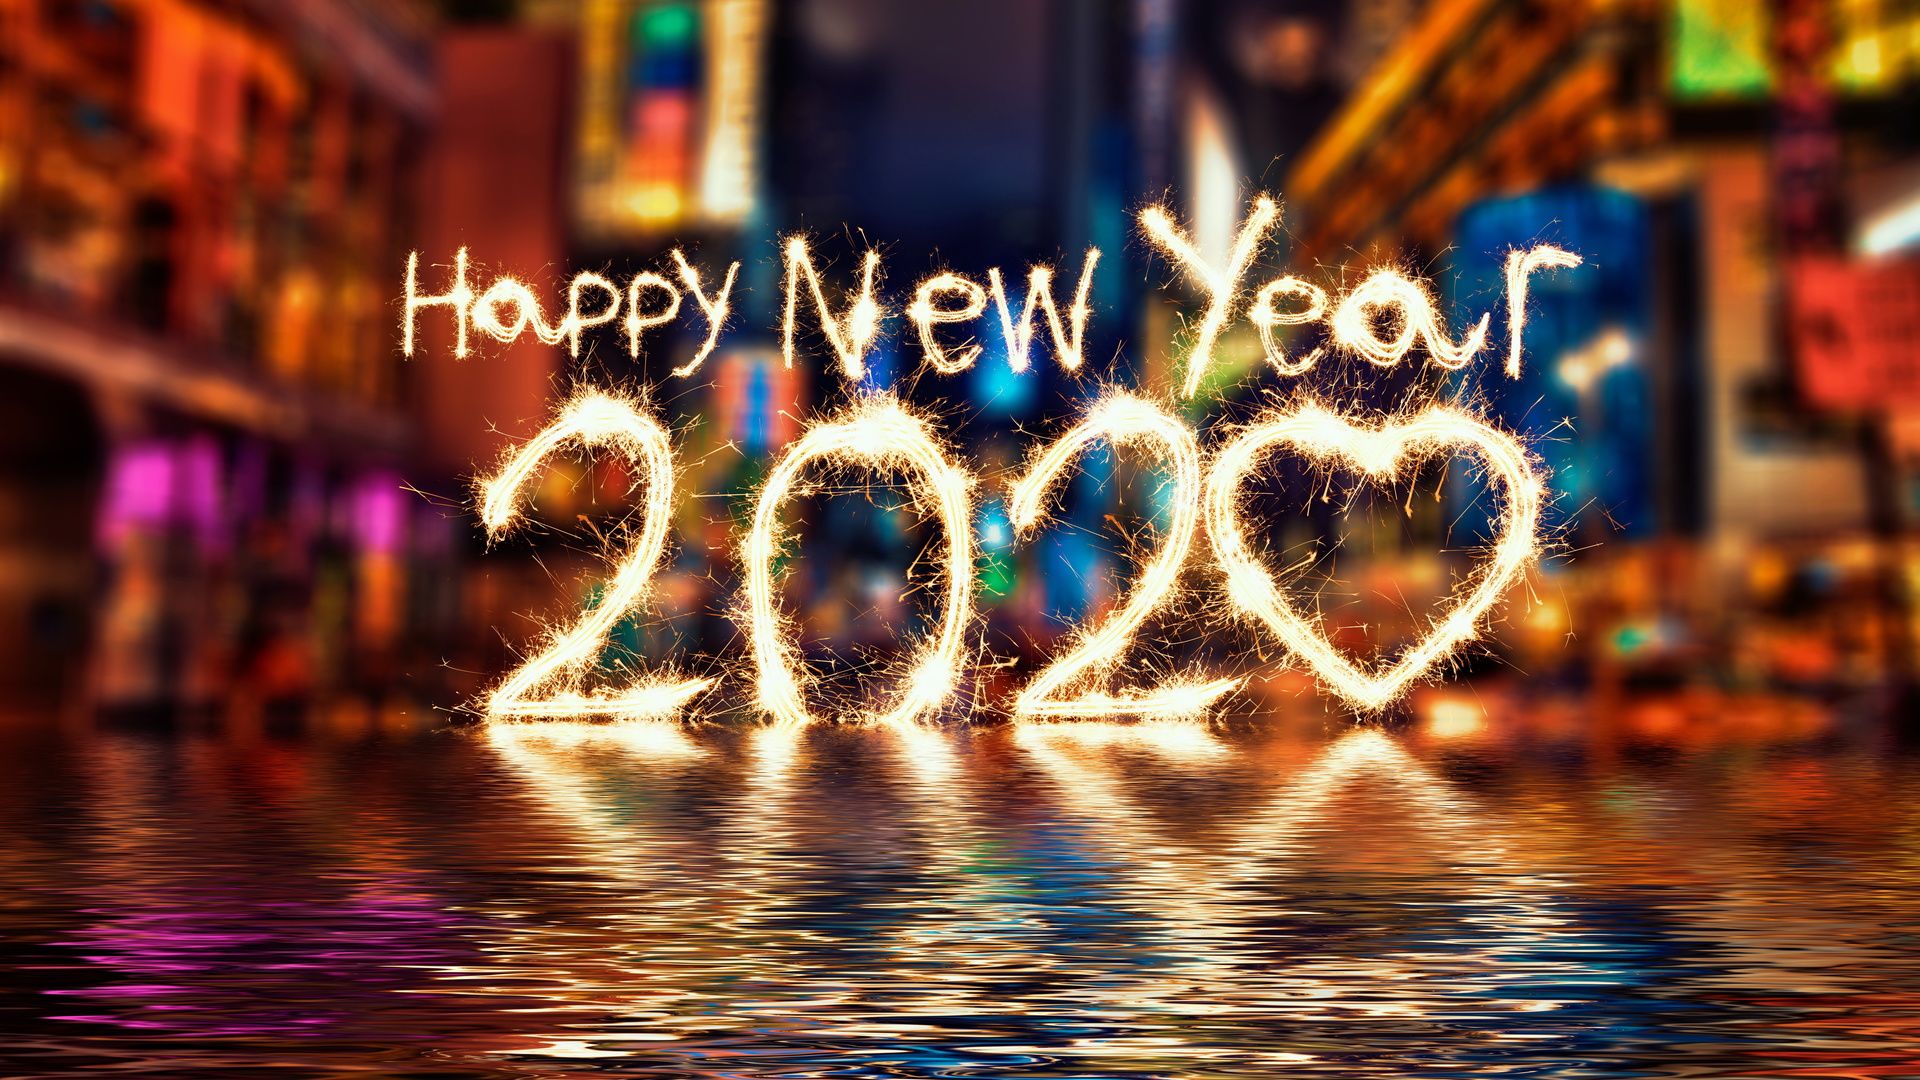 Free download Happy New Year 2020 Wallpapers 30 images